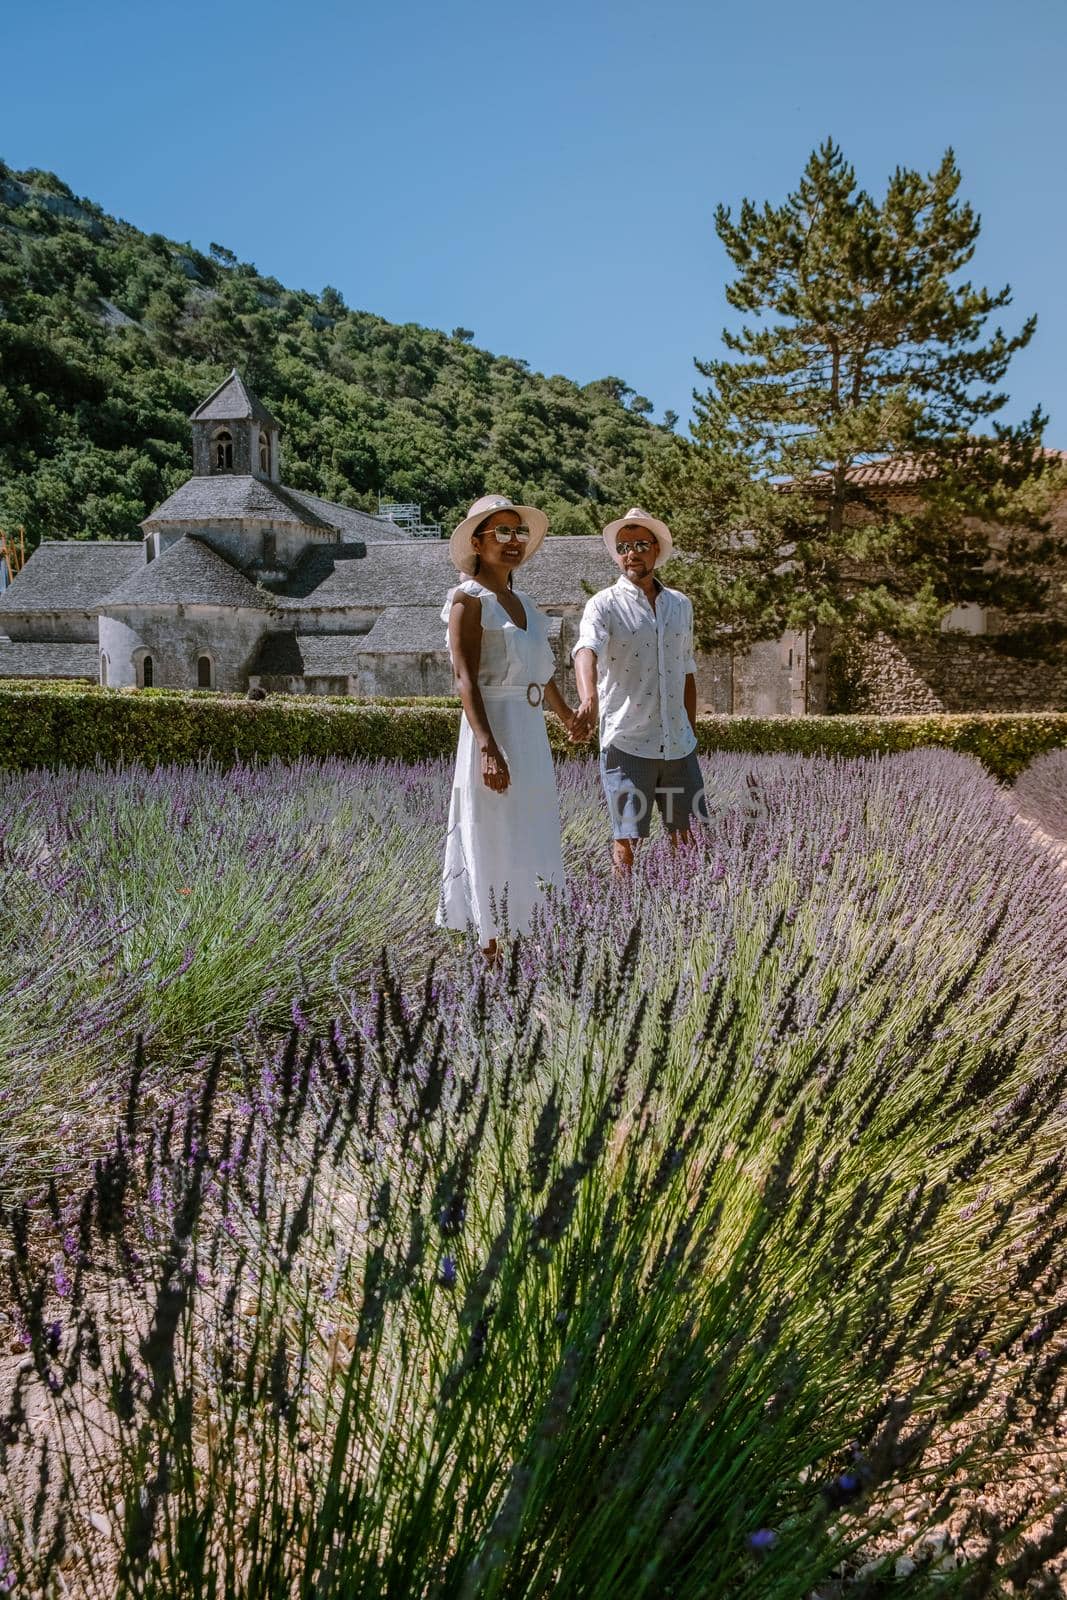 couple visit the old town of Gordes Provence,Blooming purple lavender fields at Senanque monastery, Provence, southern France by fokkebok